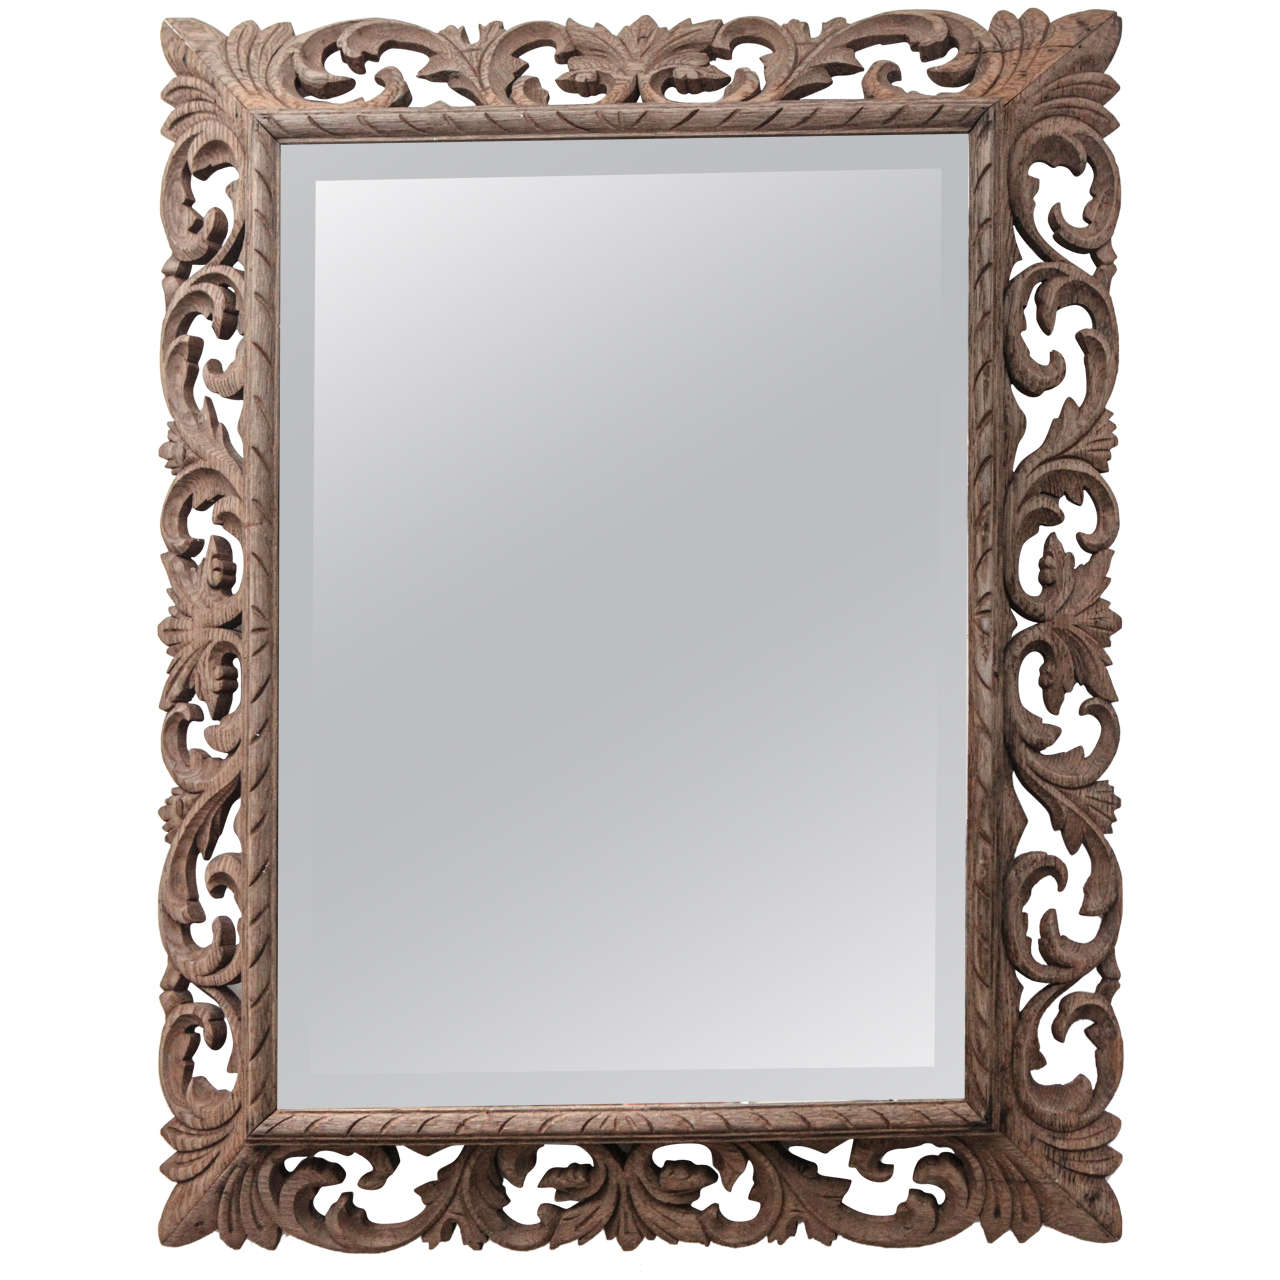 Late 19th Century French Carved Wood Mirror | Large